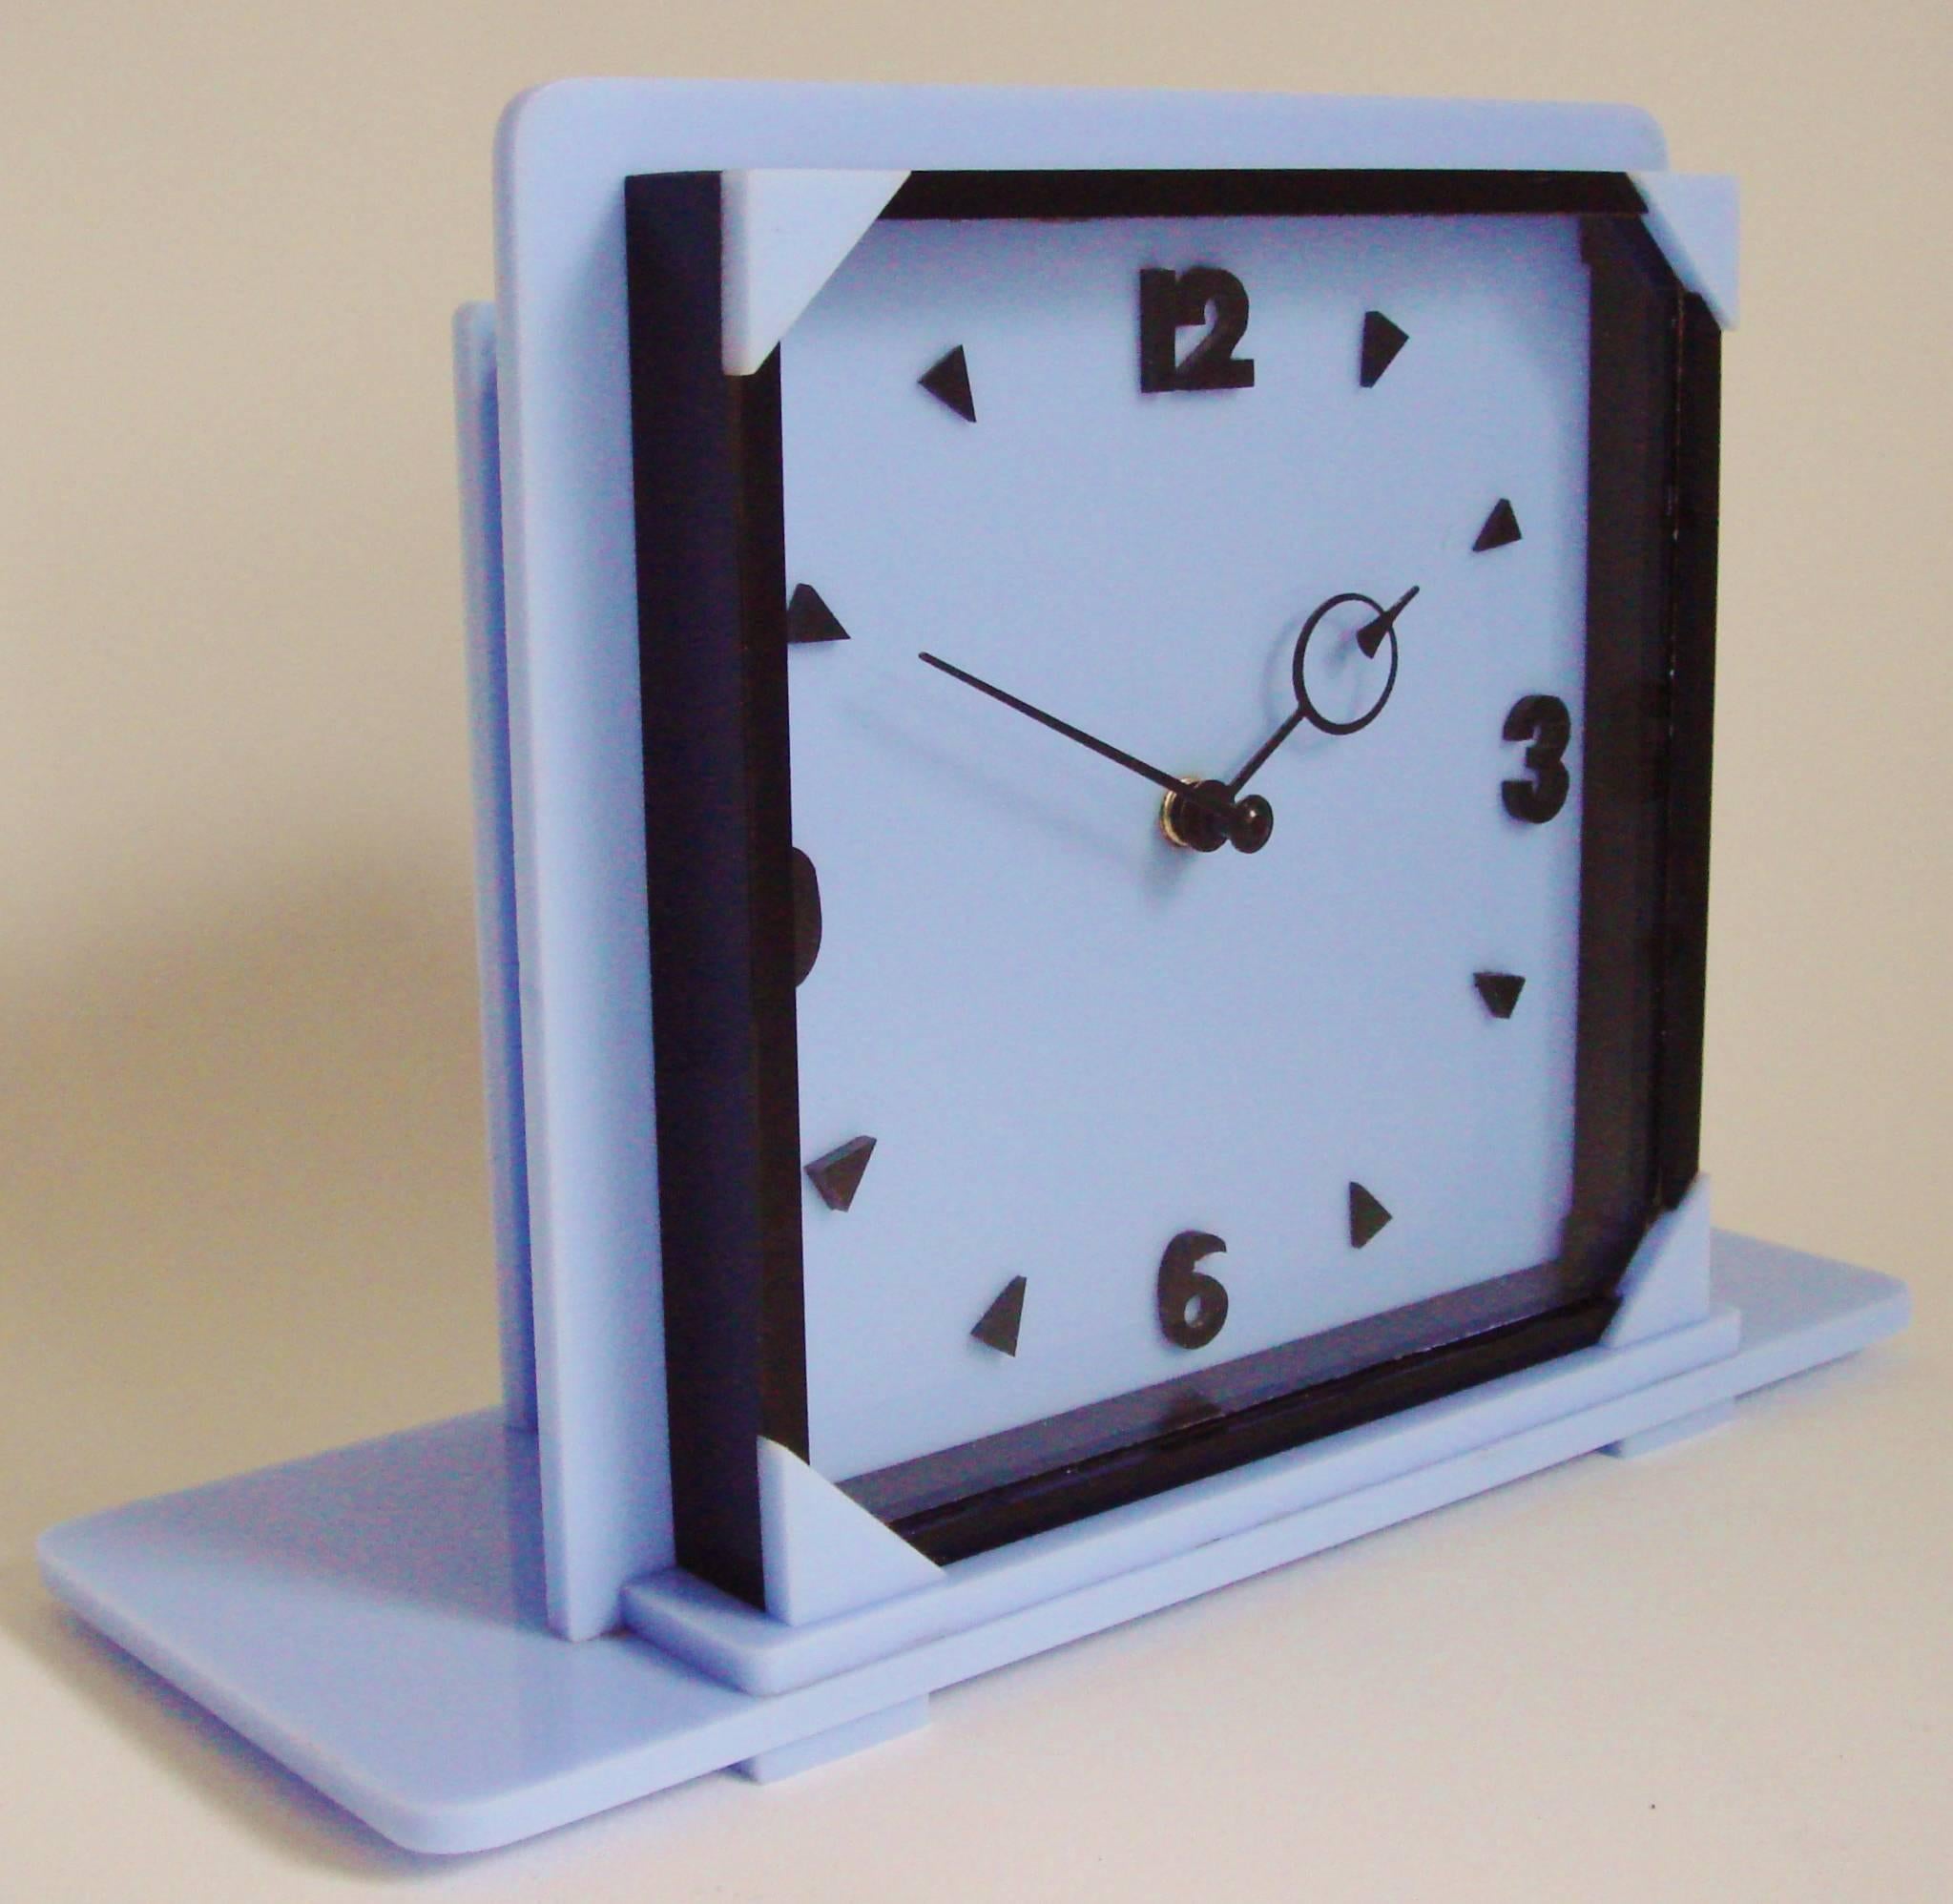 Molded Rare English Art Deco Blue, Black and Clear Lucite Electric Metamec Mantle Clock